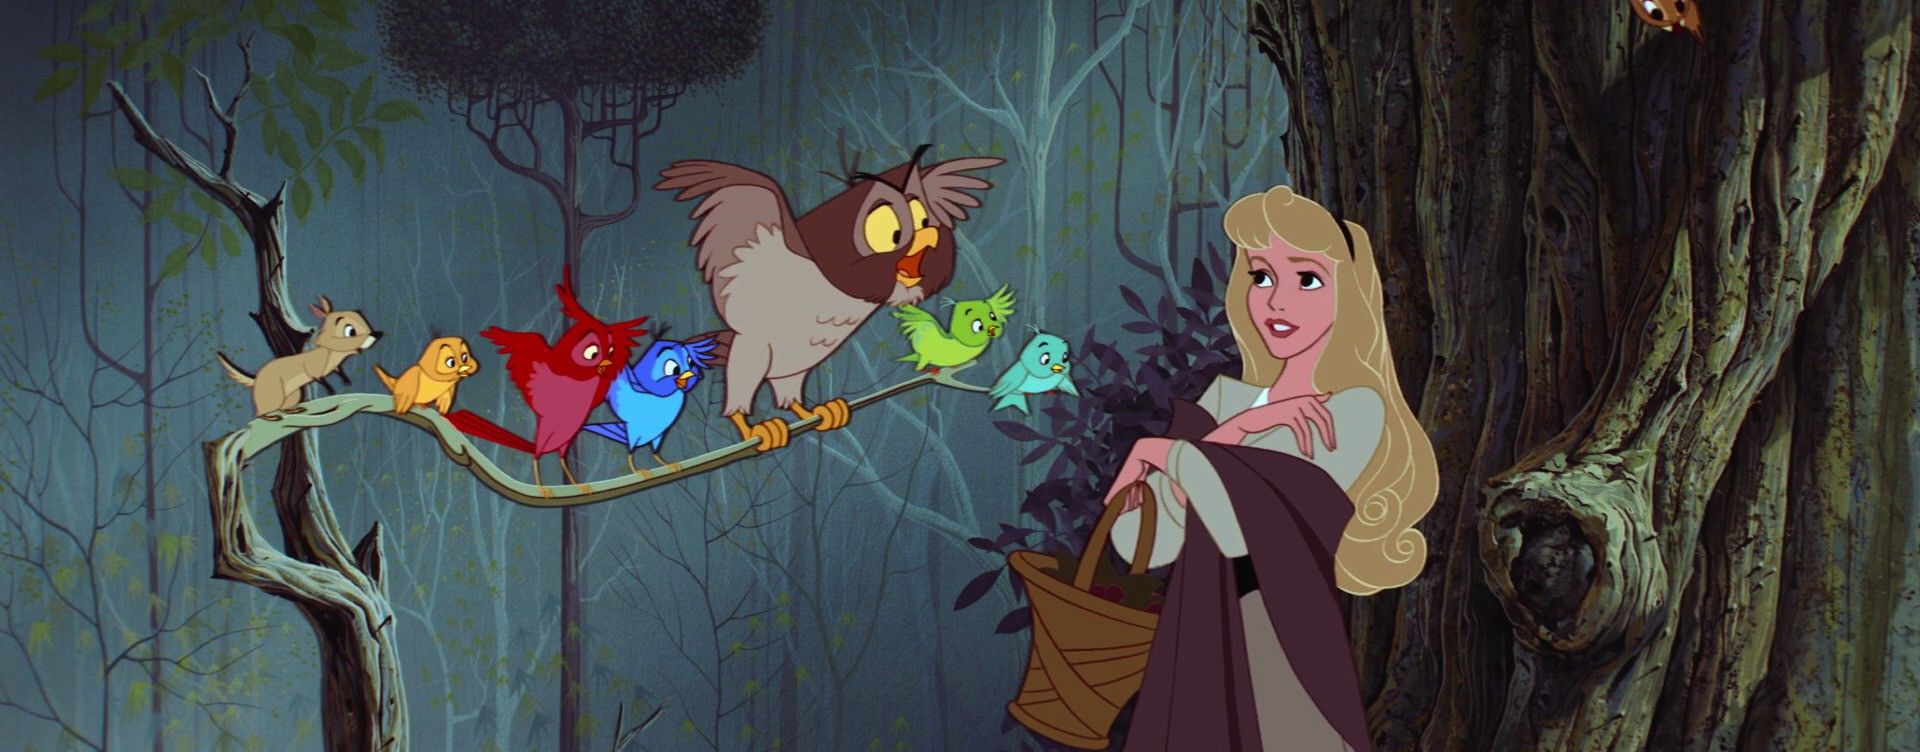 How Was 'Sleeping Beauty' the Pinnacle of Classic Disney Animation?